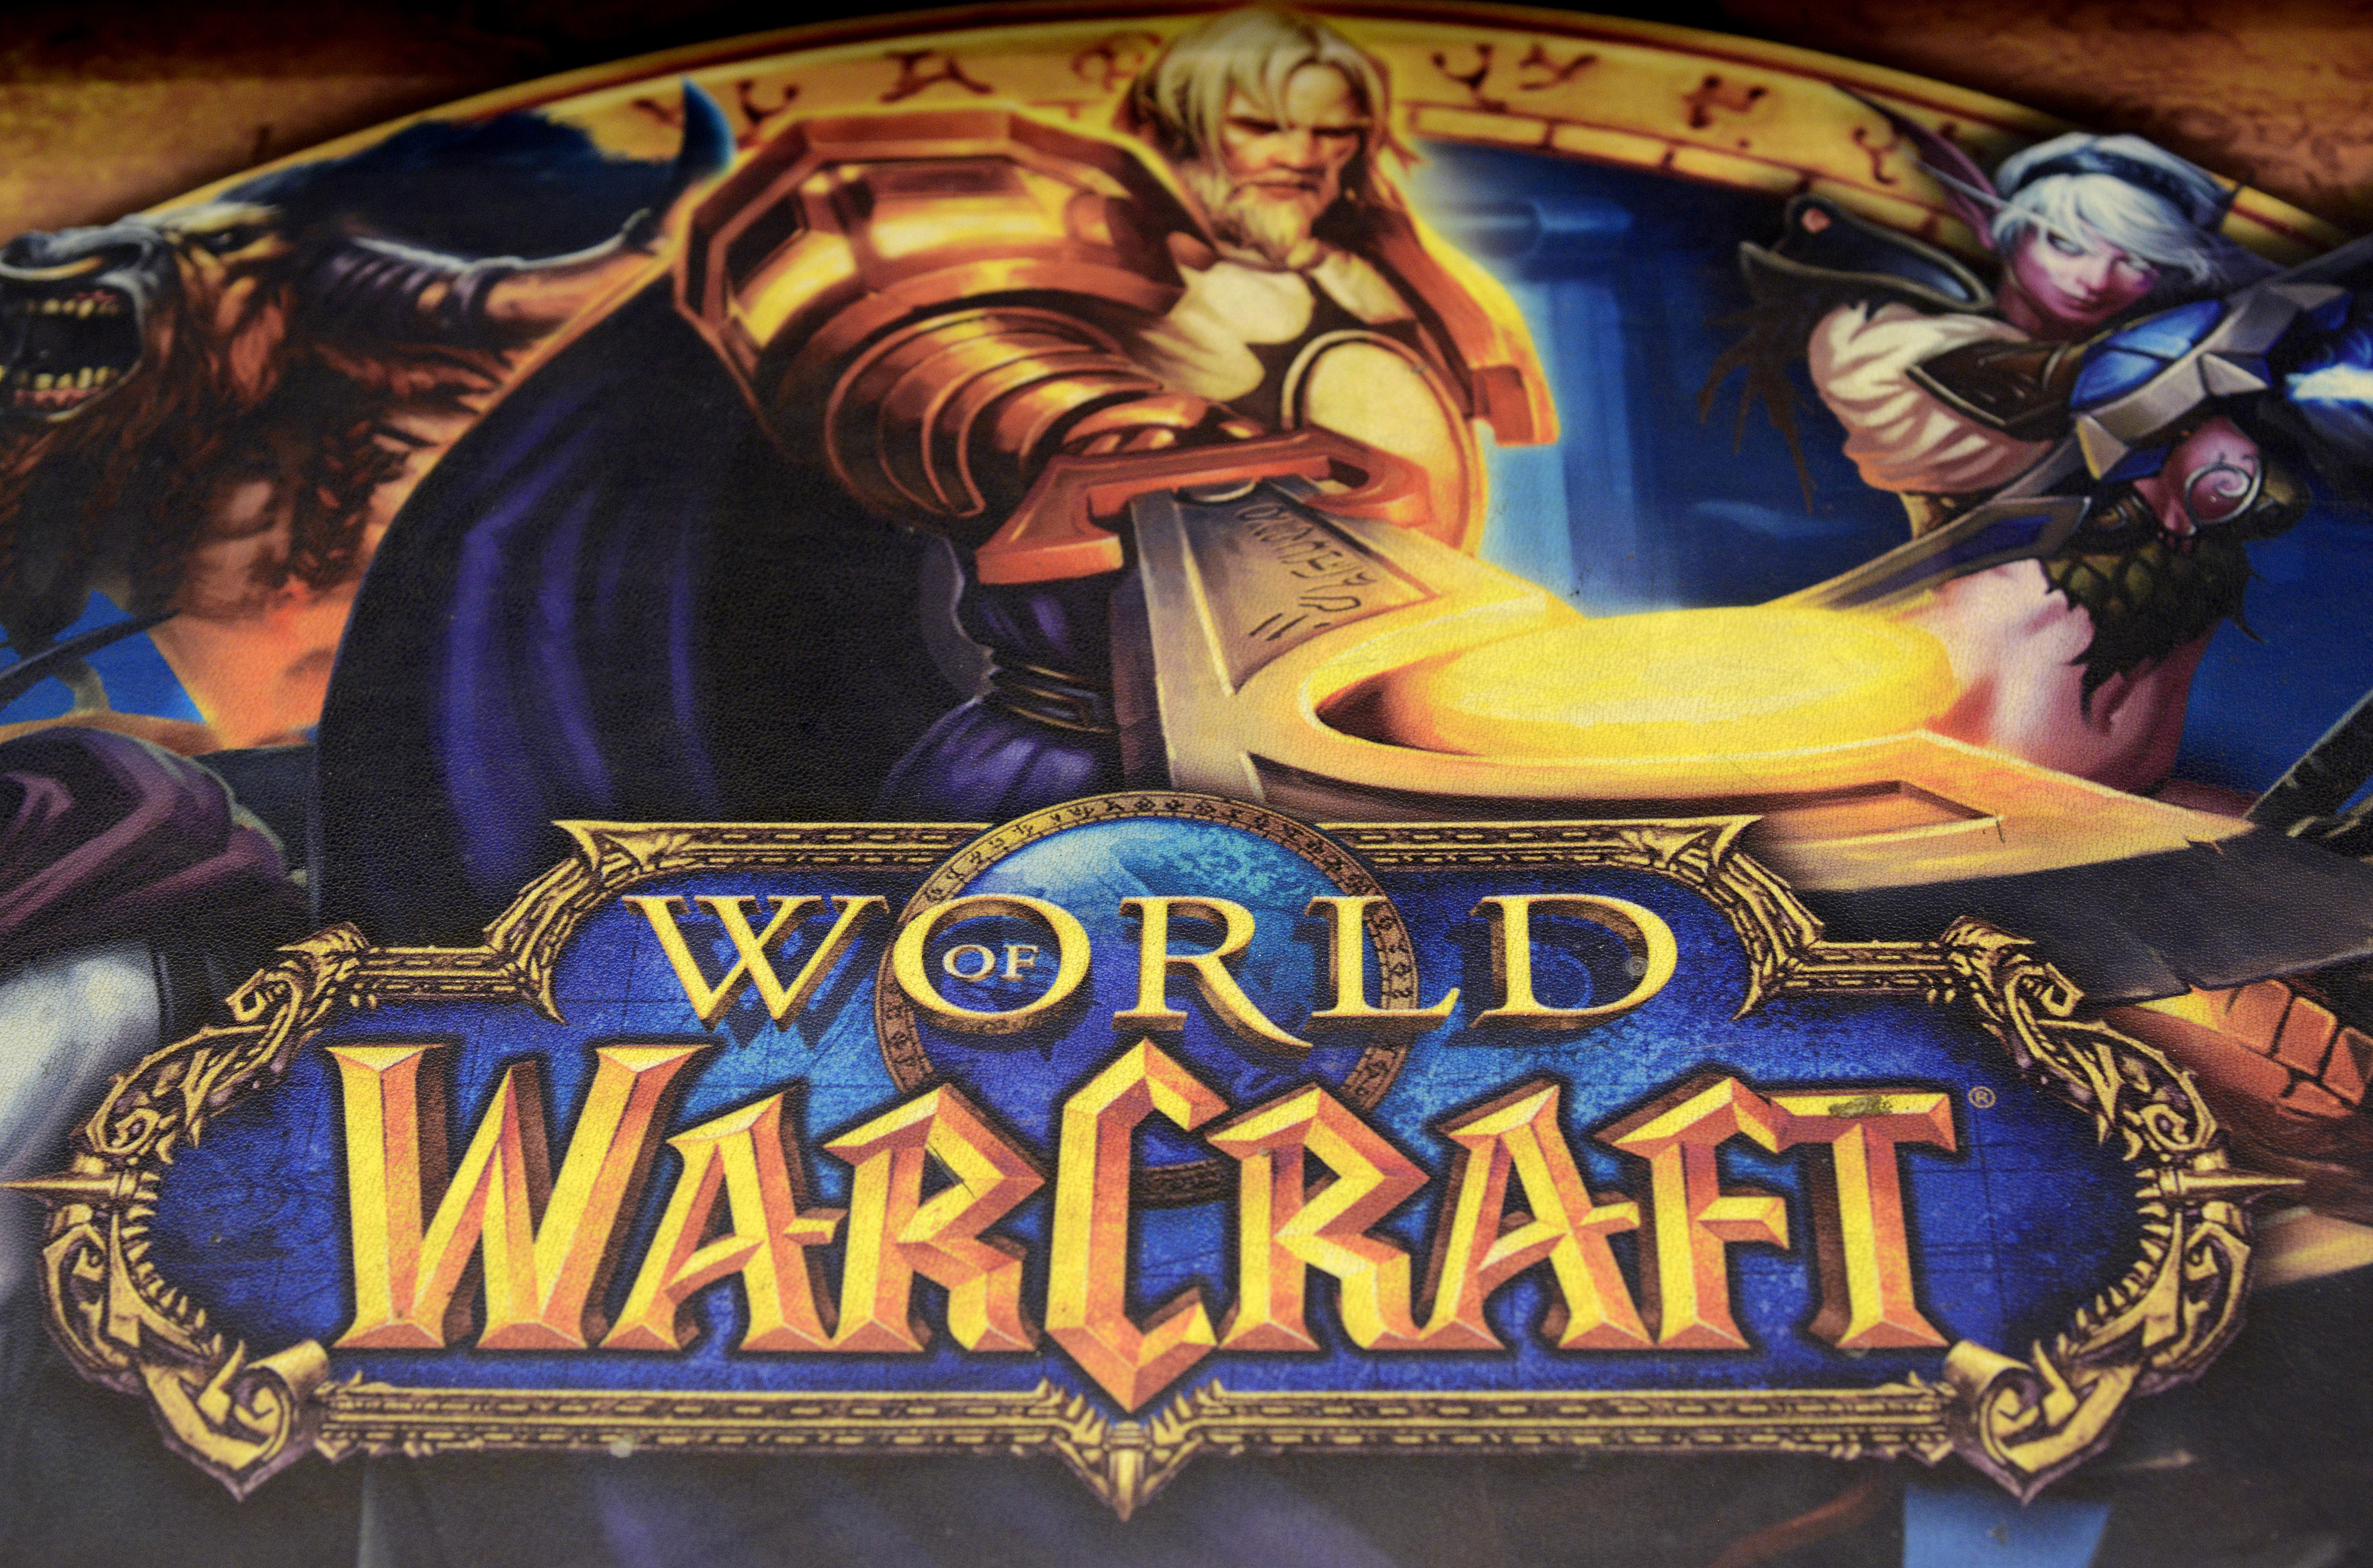 An advertisement for the ''World of Warcraft'' game, produced by Activision Blizzard Inc., a video-game publishing unit of Vivendi SA, is displayed at a store in Paris, France, on May 12, 2012. (Fabrice Dimier—Bloomberg/Getty Images)